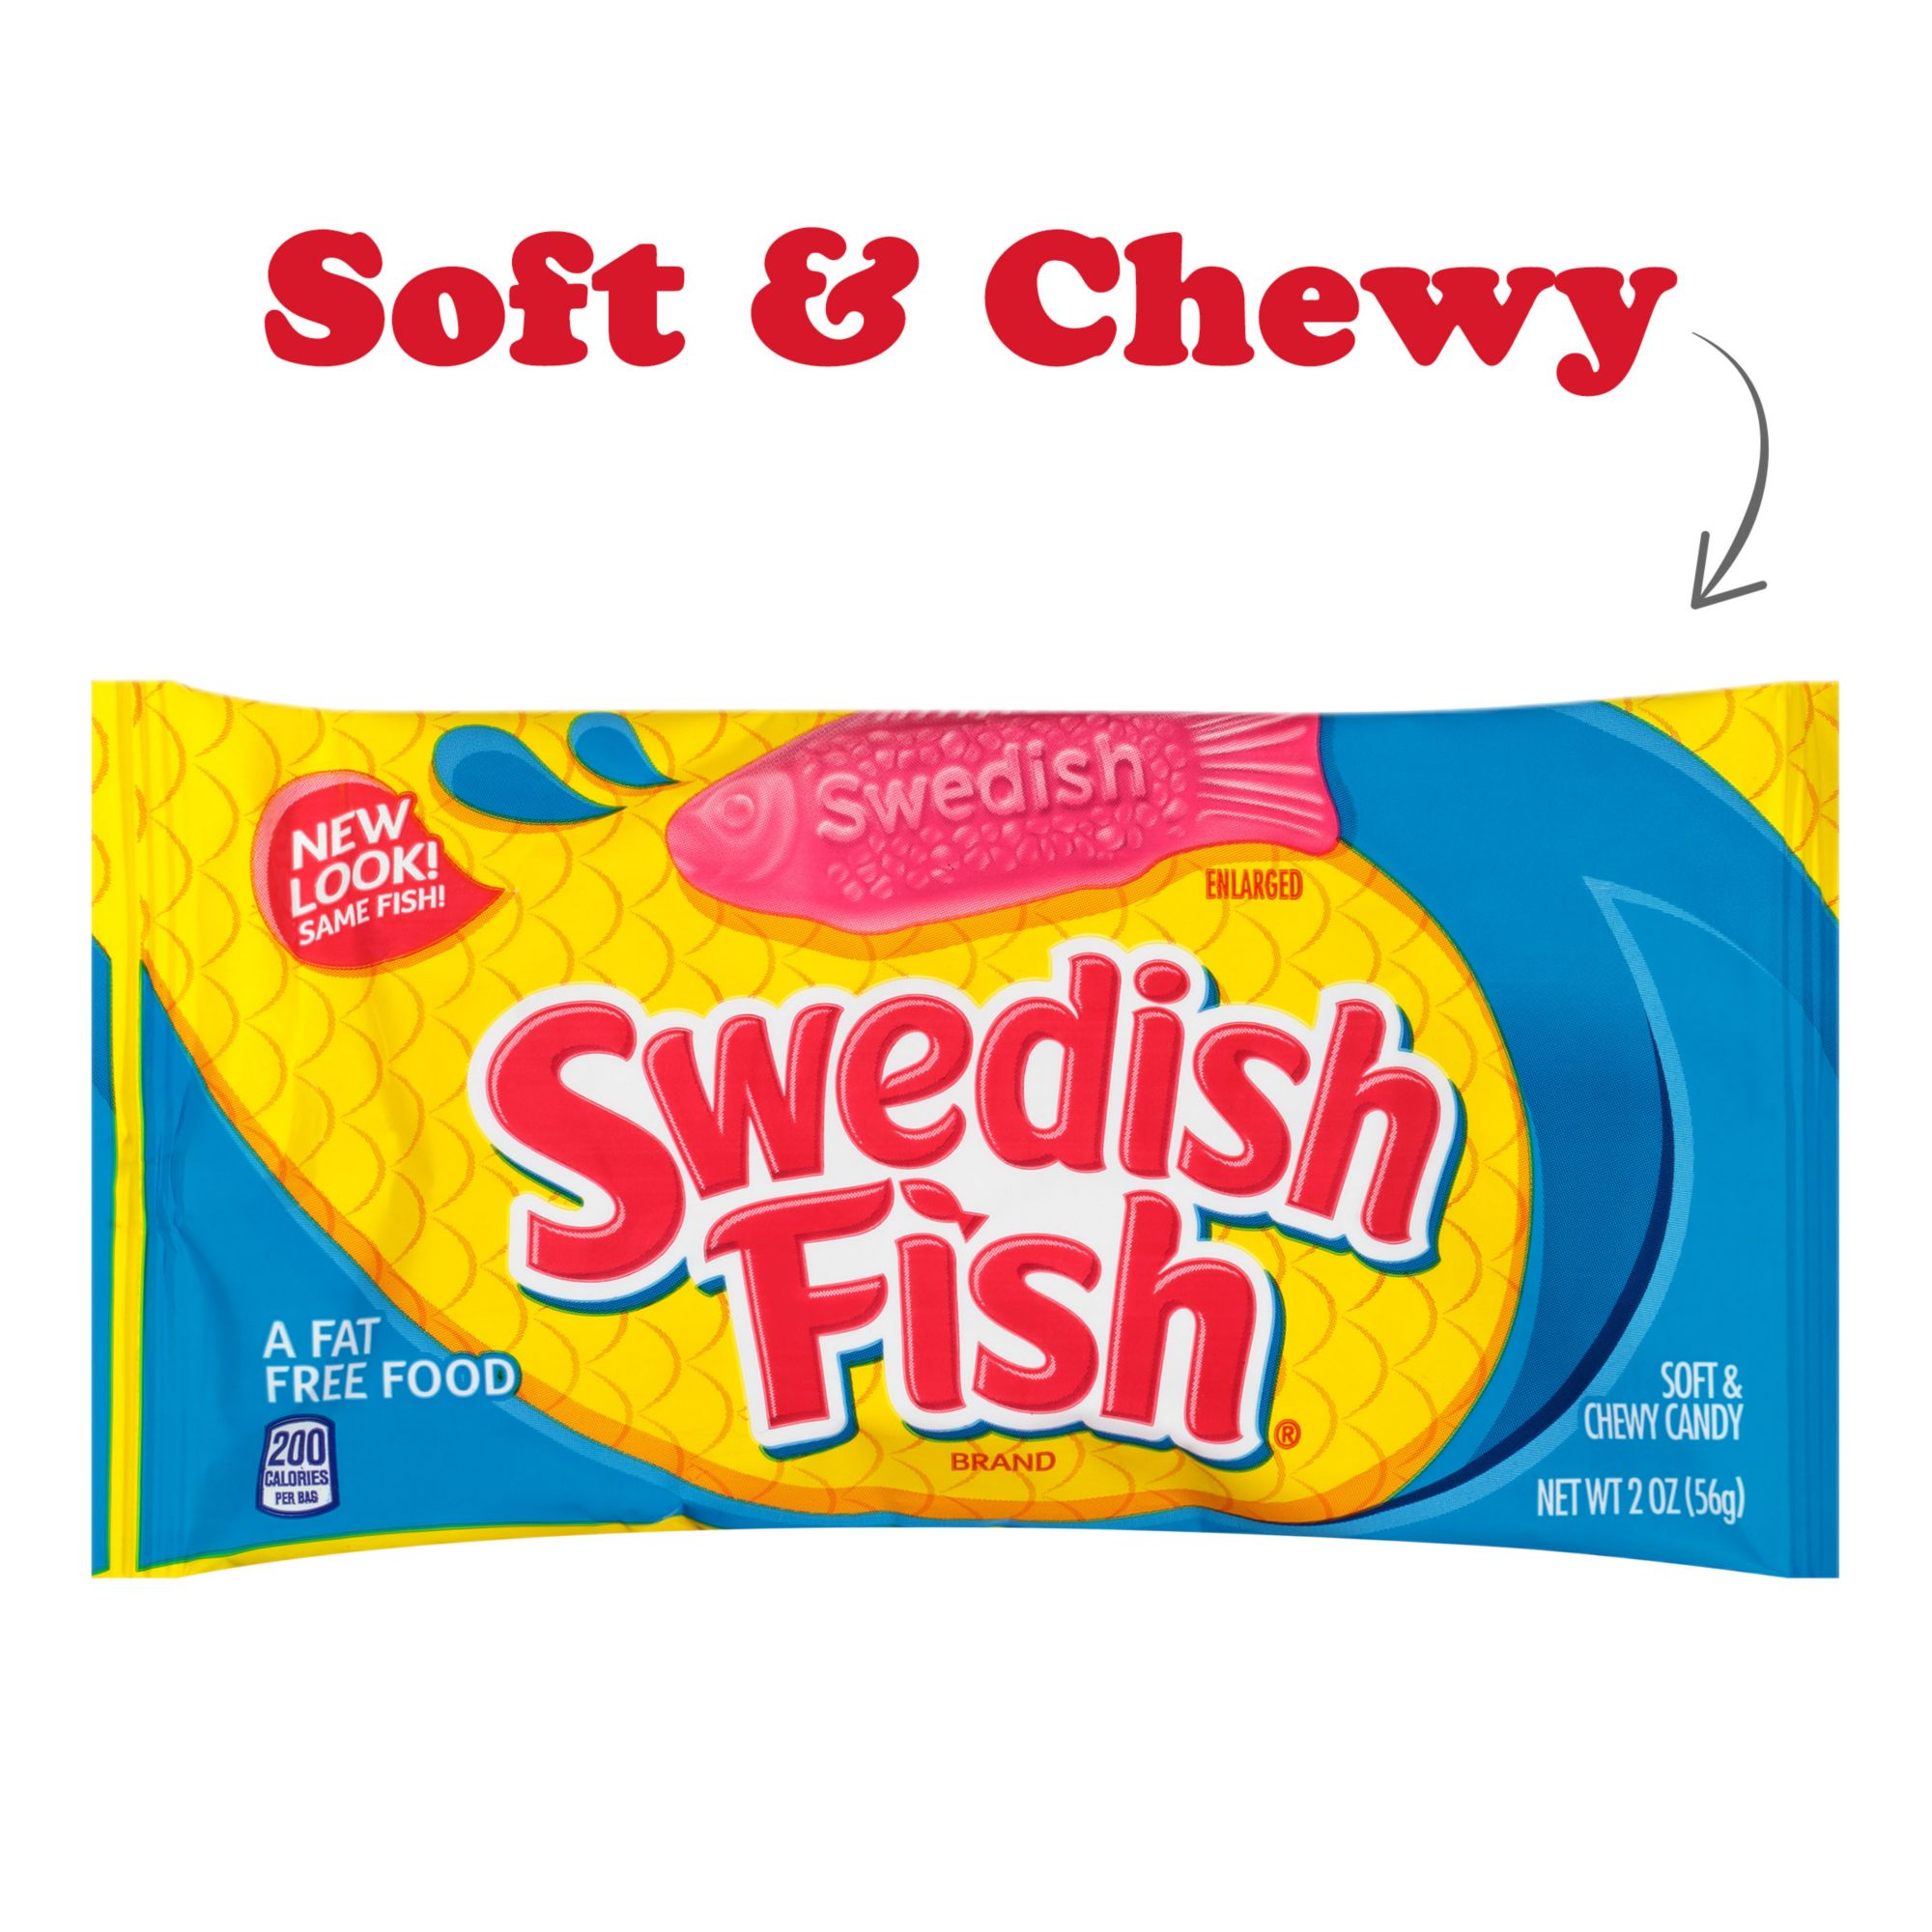 Swedish Fish Mini's with a Tropical Flavor, 3.5 oz. Boxes